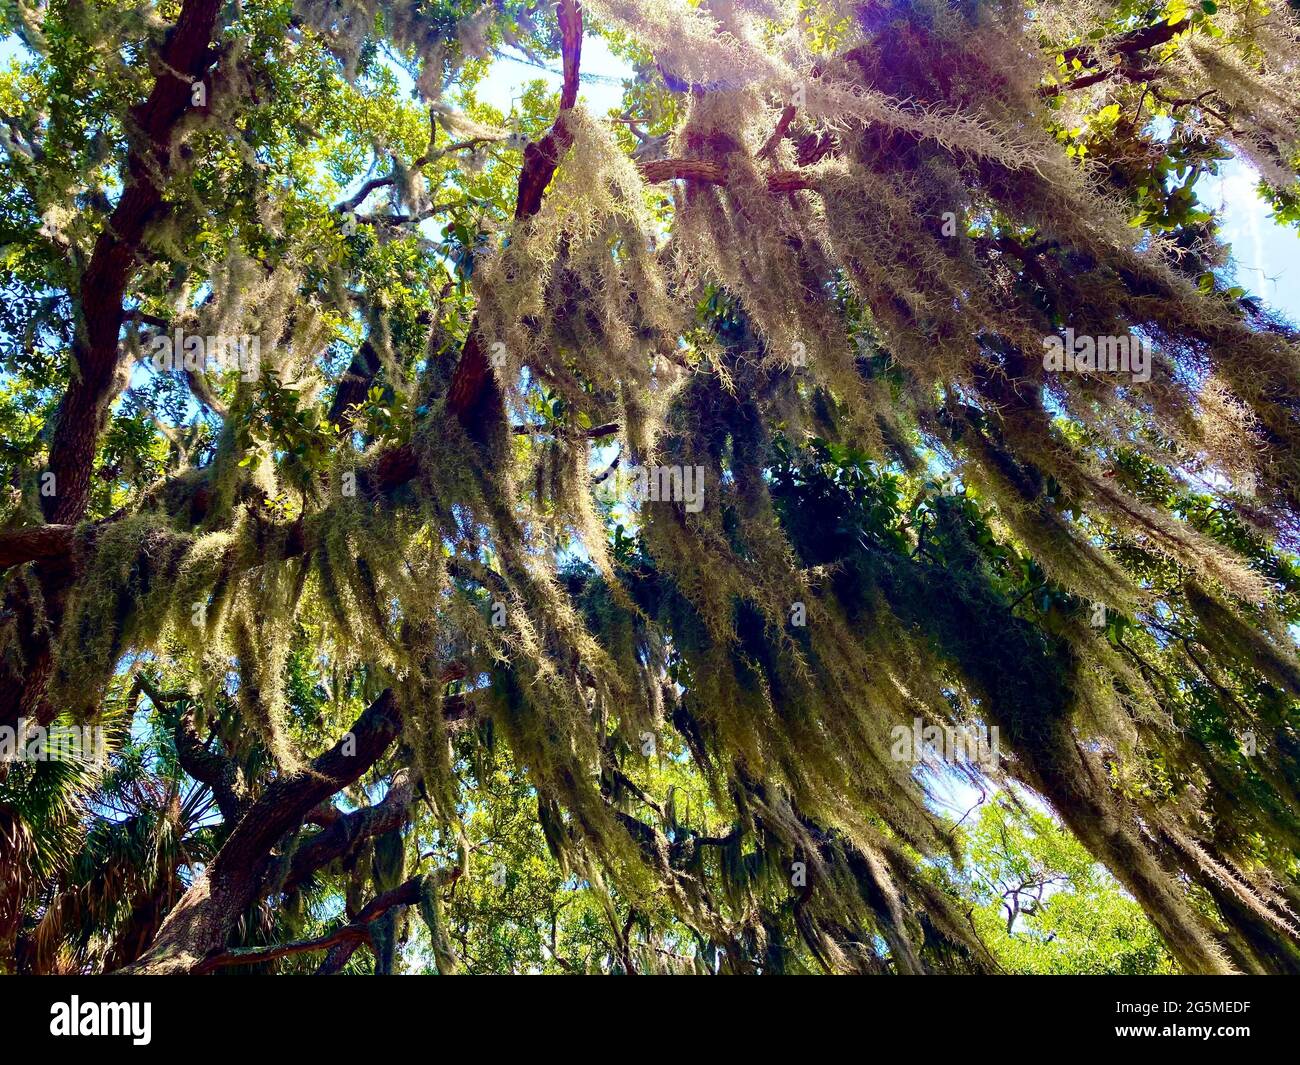 Spanish moss is an epiphytic flowering plant that often grows upon large trees in tropical and subtropical climates. It is native to much of Mexico. Stock Photo